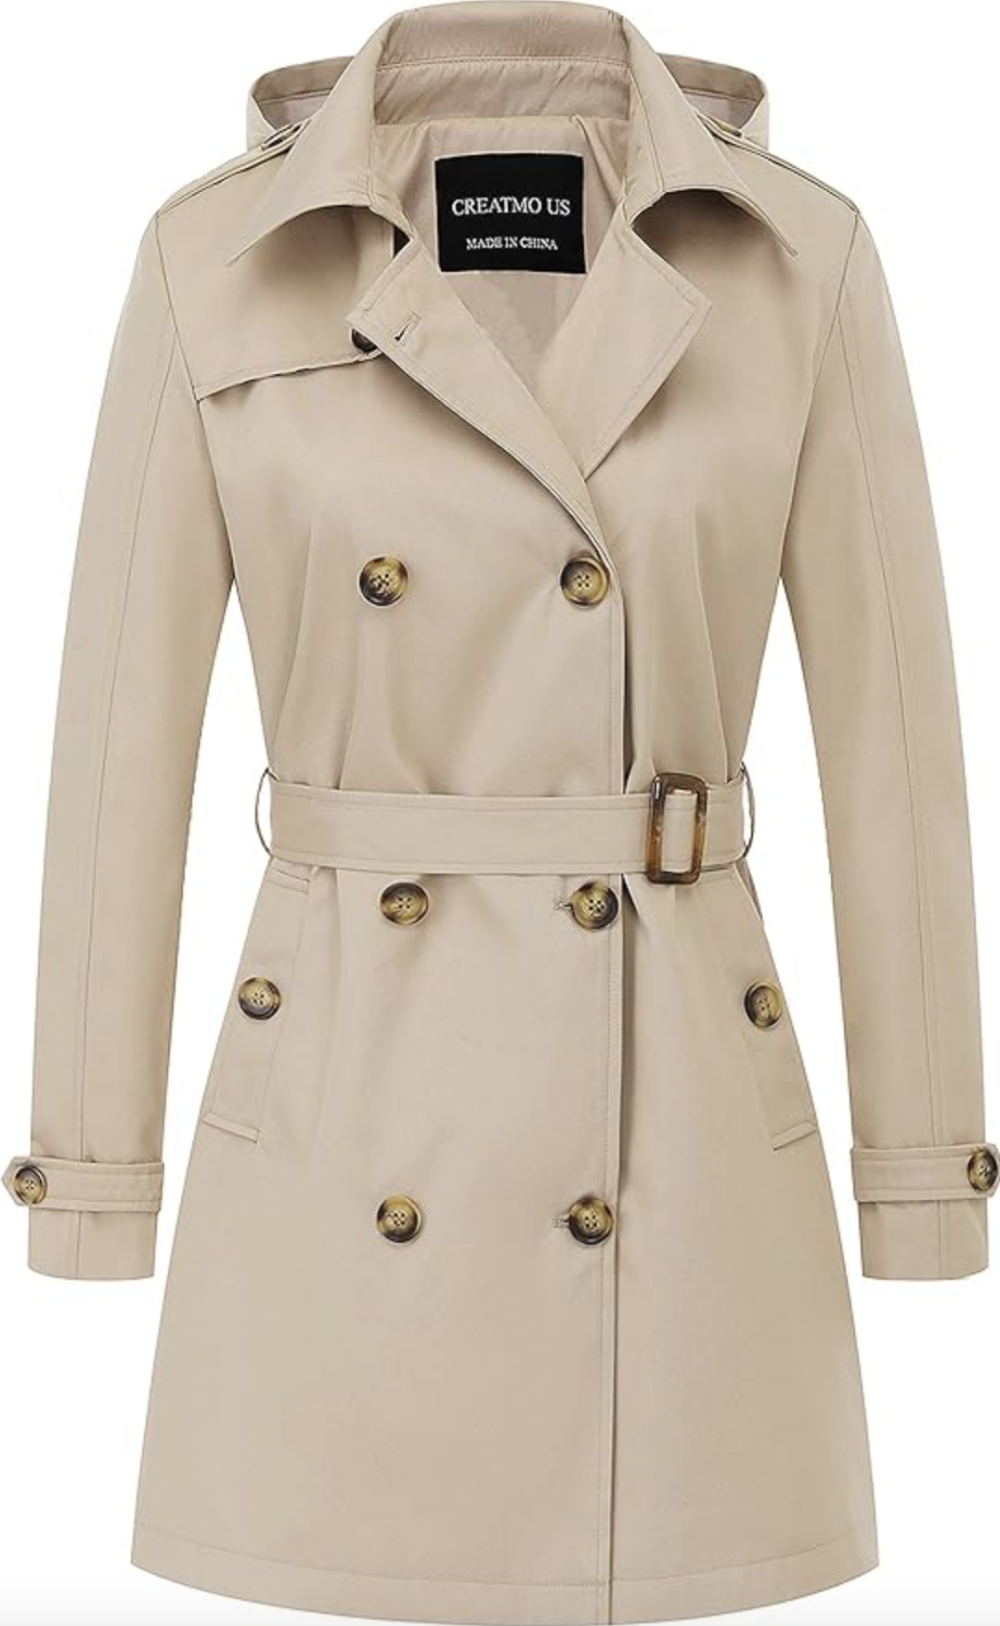 CREATMO US Women's Trench Coat Double-Breasted